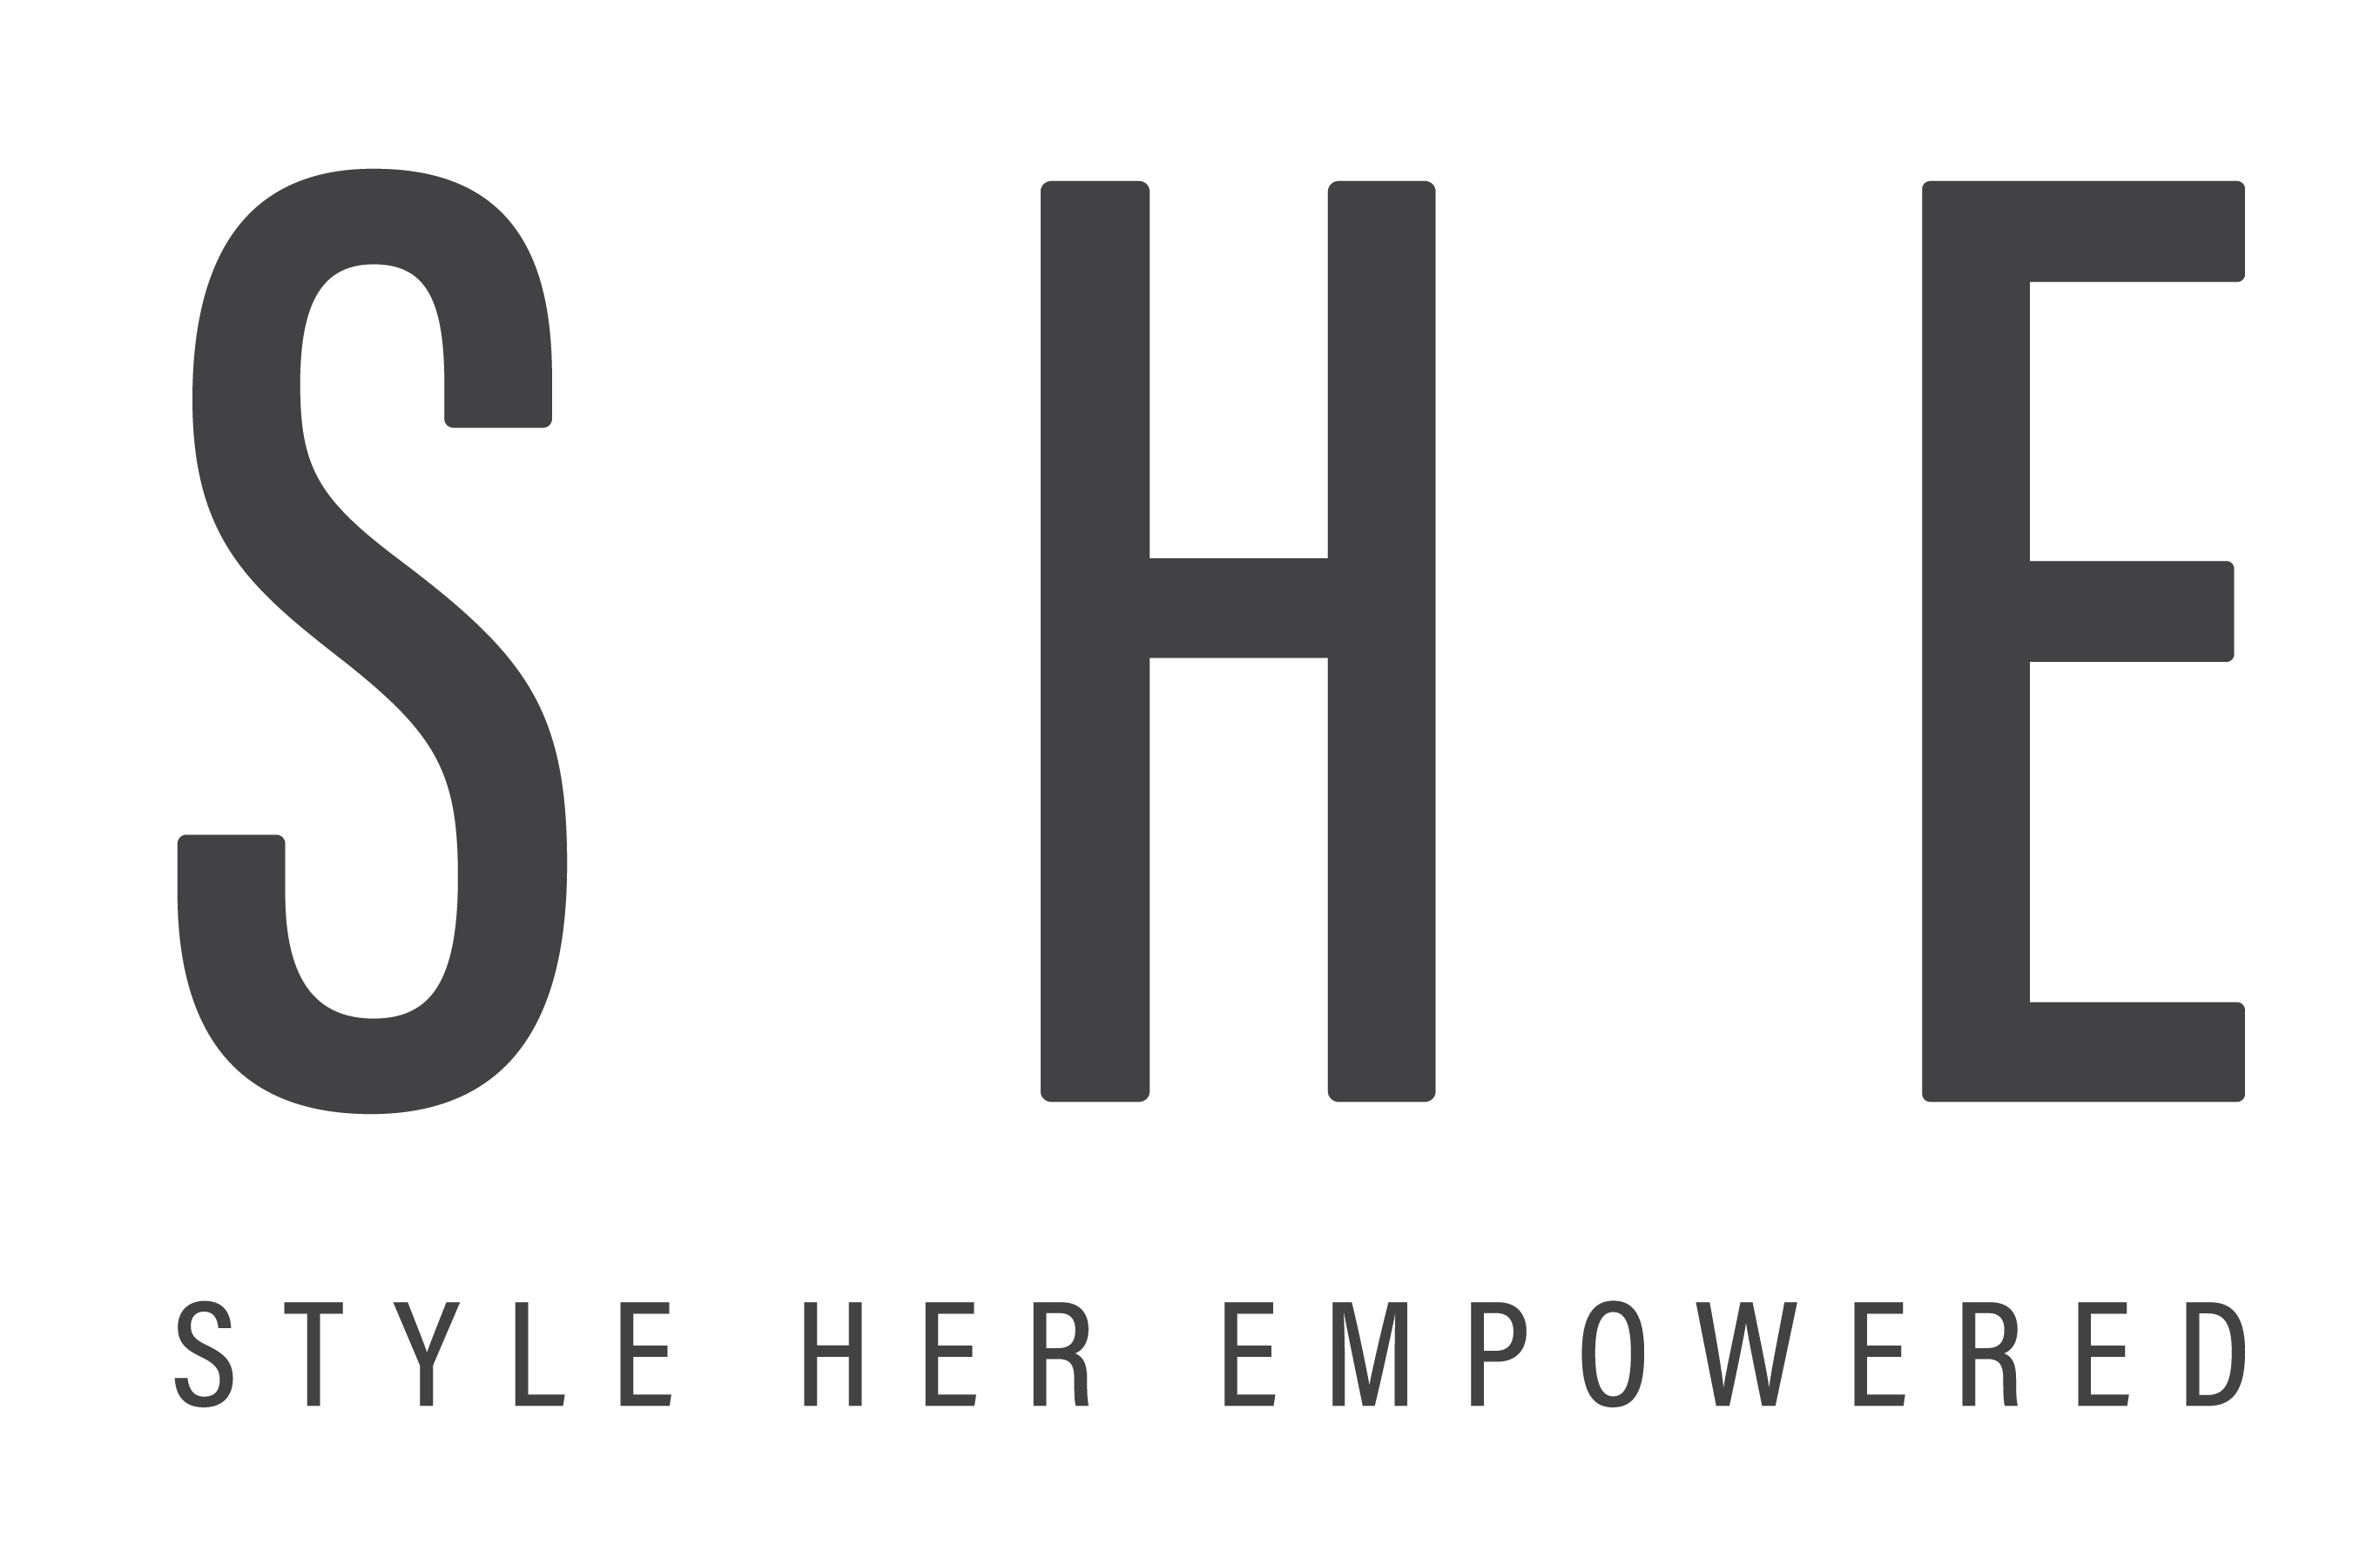 Style Her Empowered logo